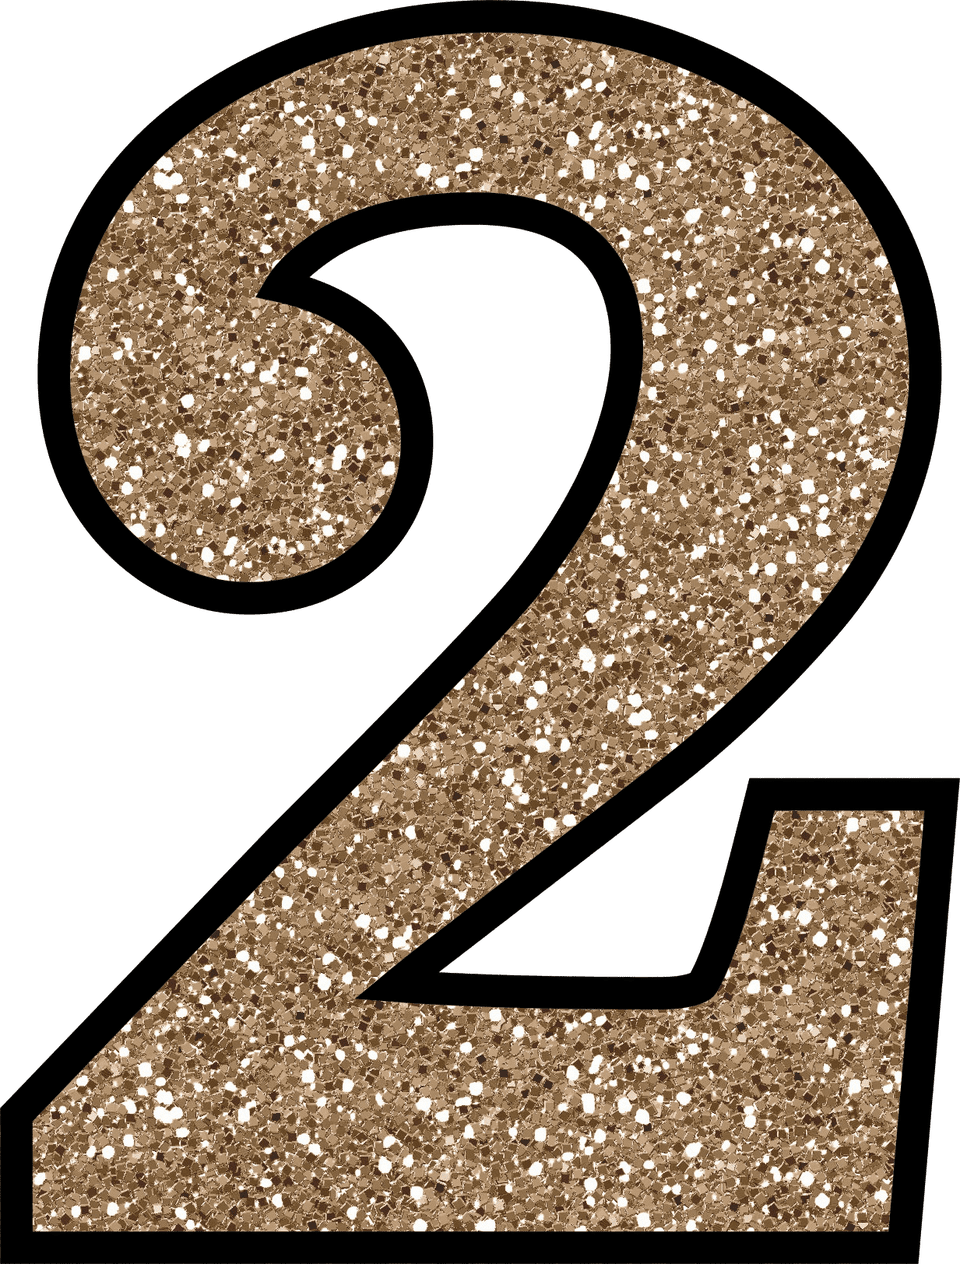 Glitter Number PNG Image High Quality PNG Image